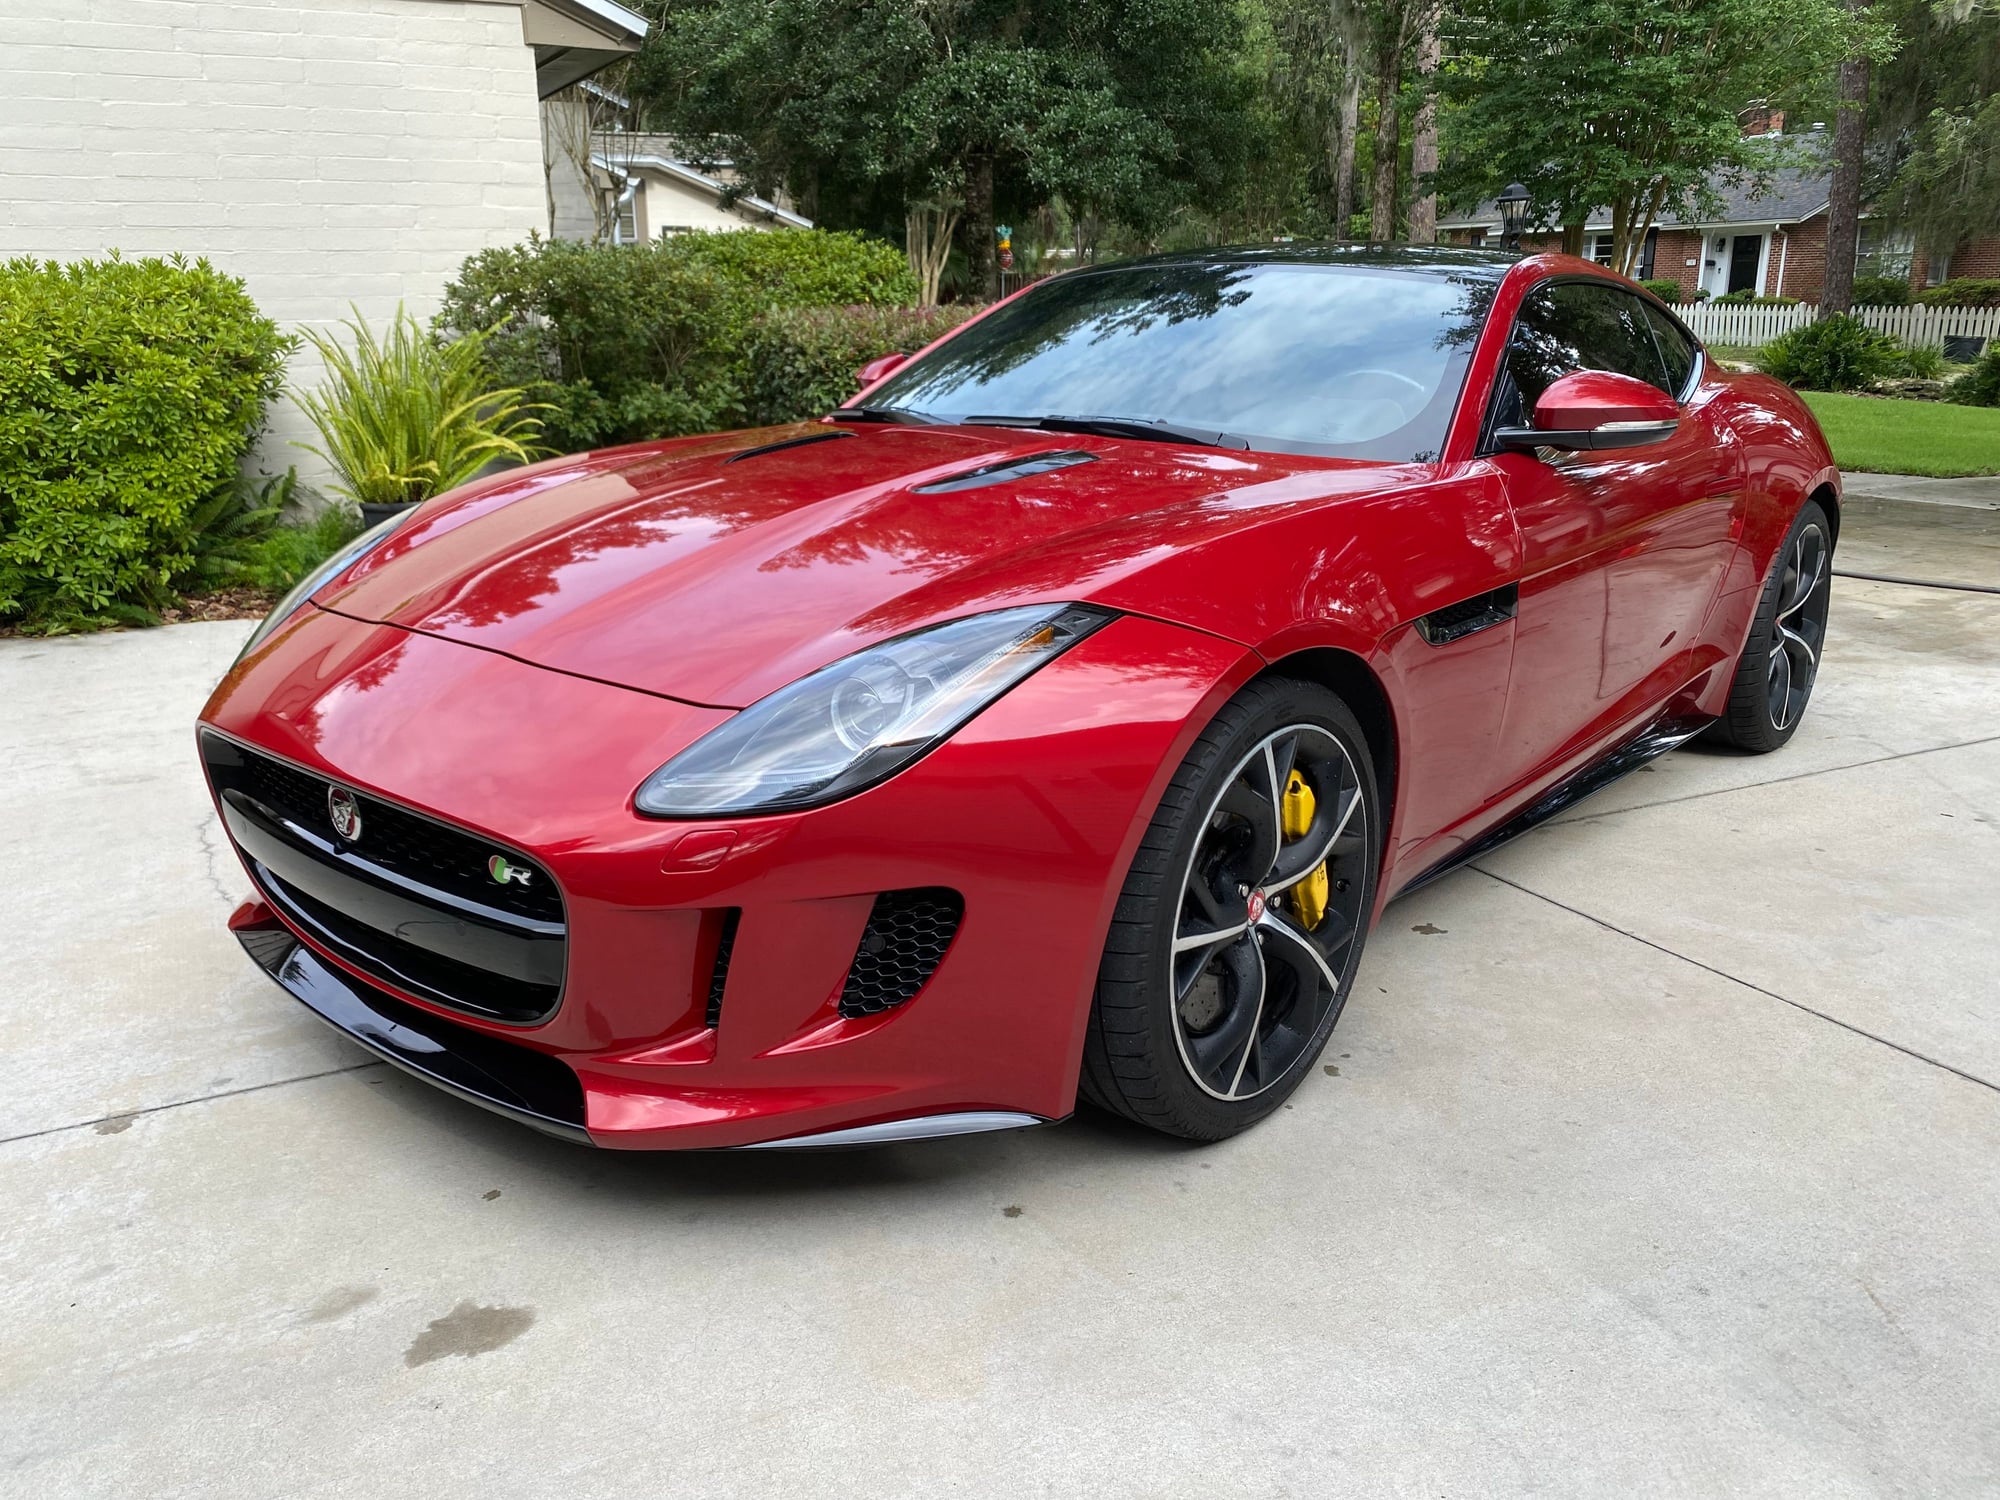 2015 Jaguar F-Type - 2015 Jaguar F-type R coupe - Used - VIN SAJWA6DA1FMK14785 - 87,730 Miles - 8 cyl - 2WD - Automatic - Coupe - Red - Gainesville, FL 32603, United States